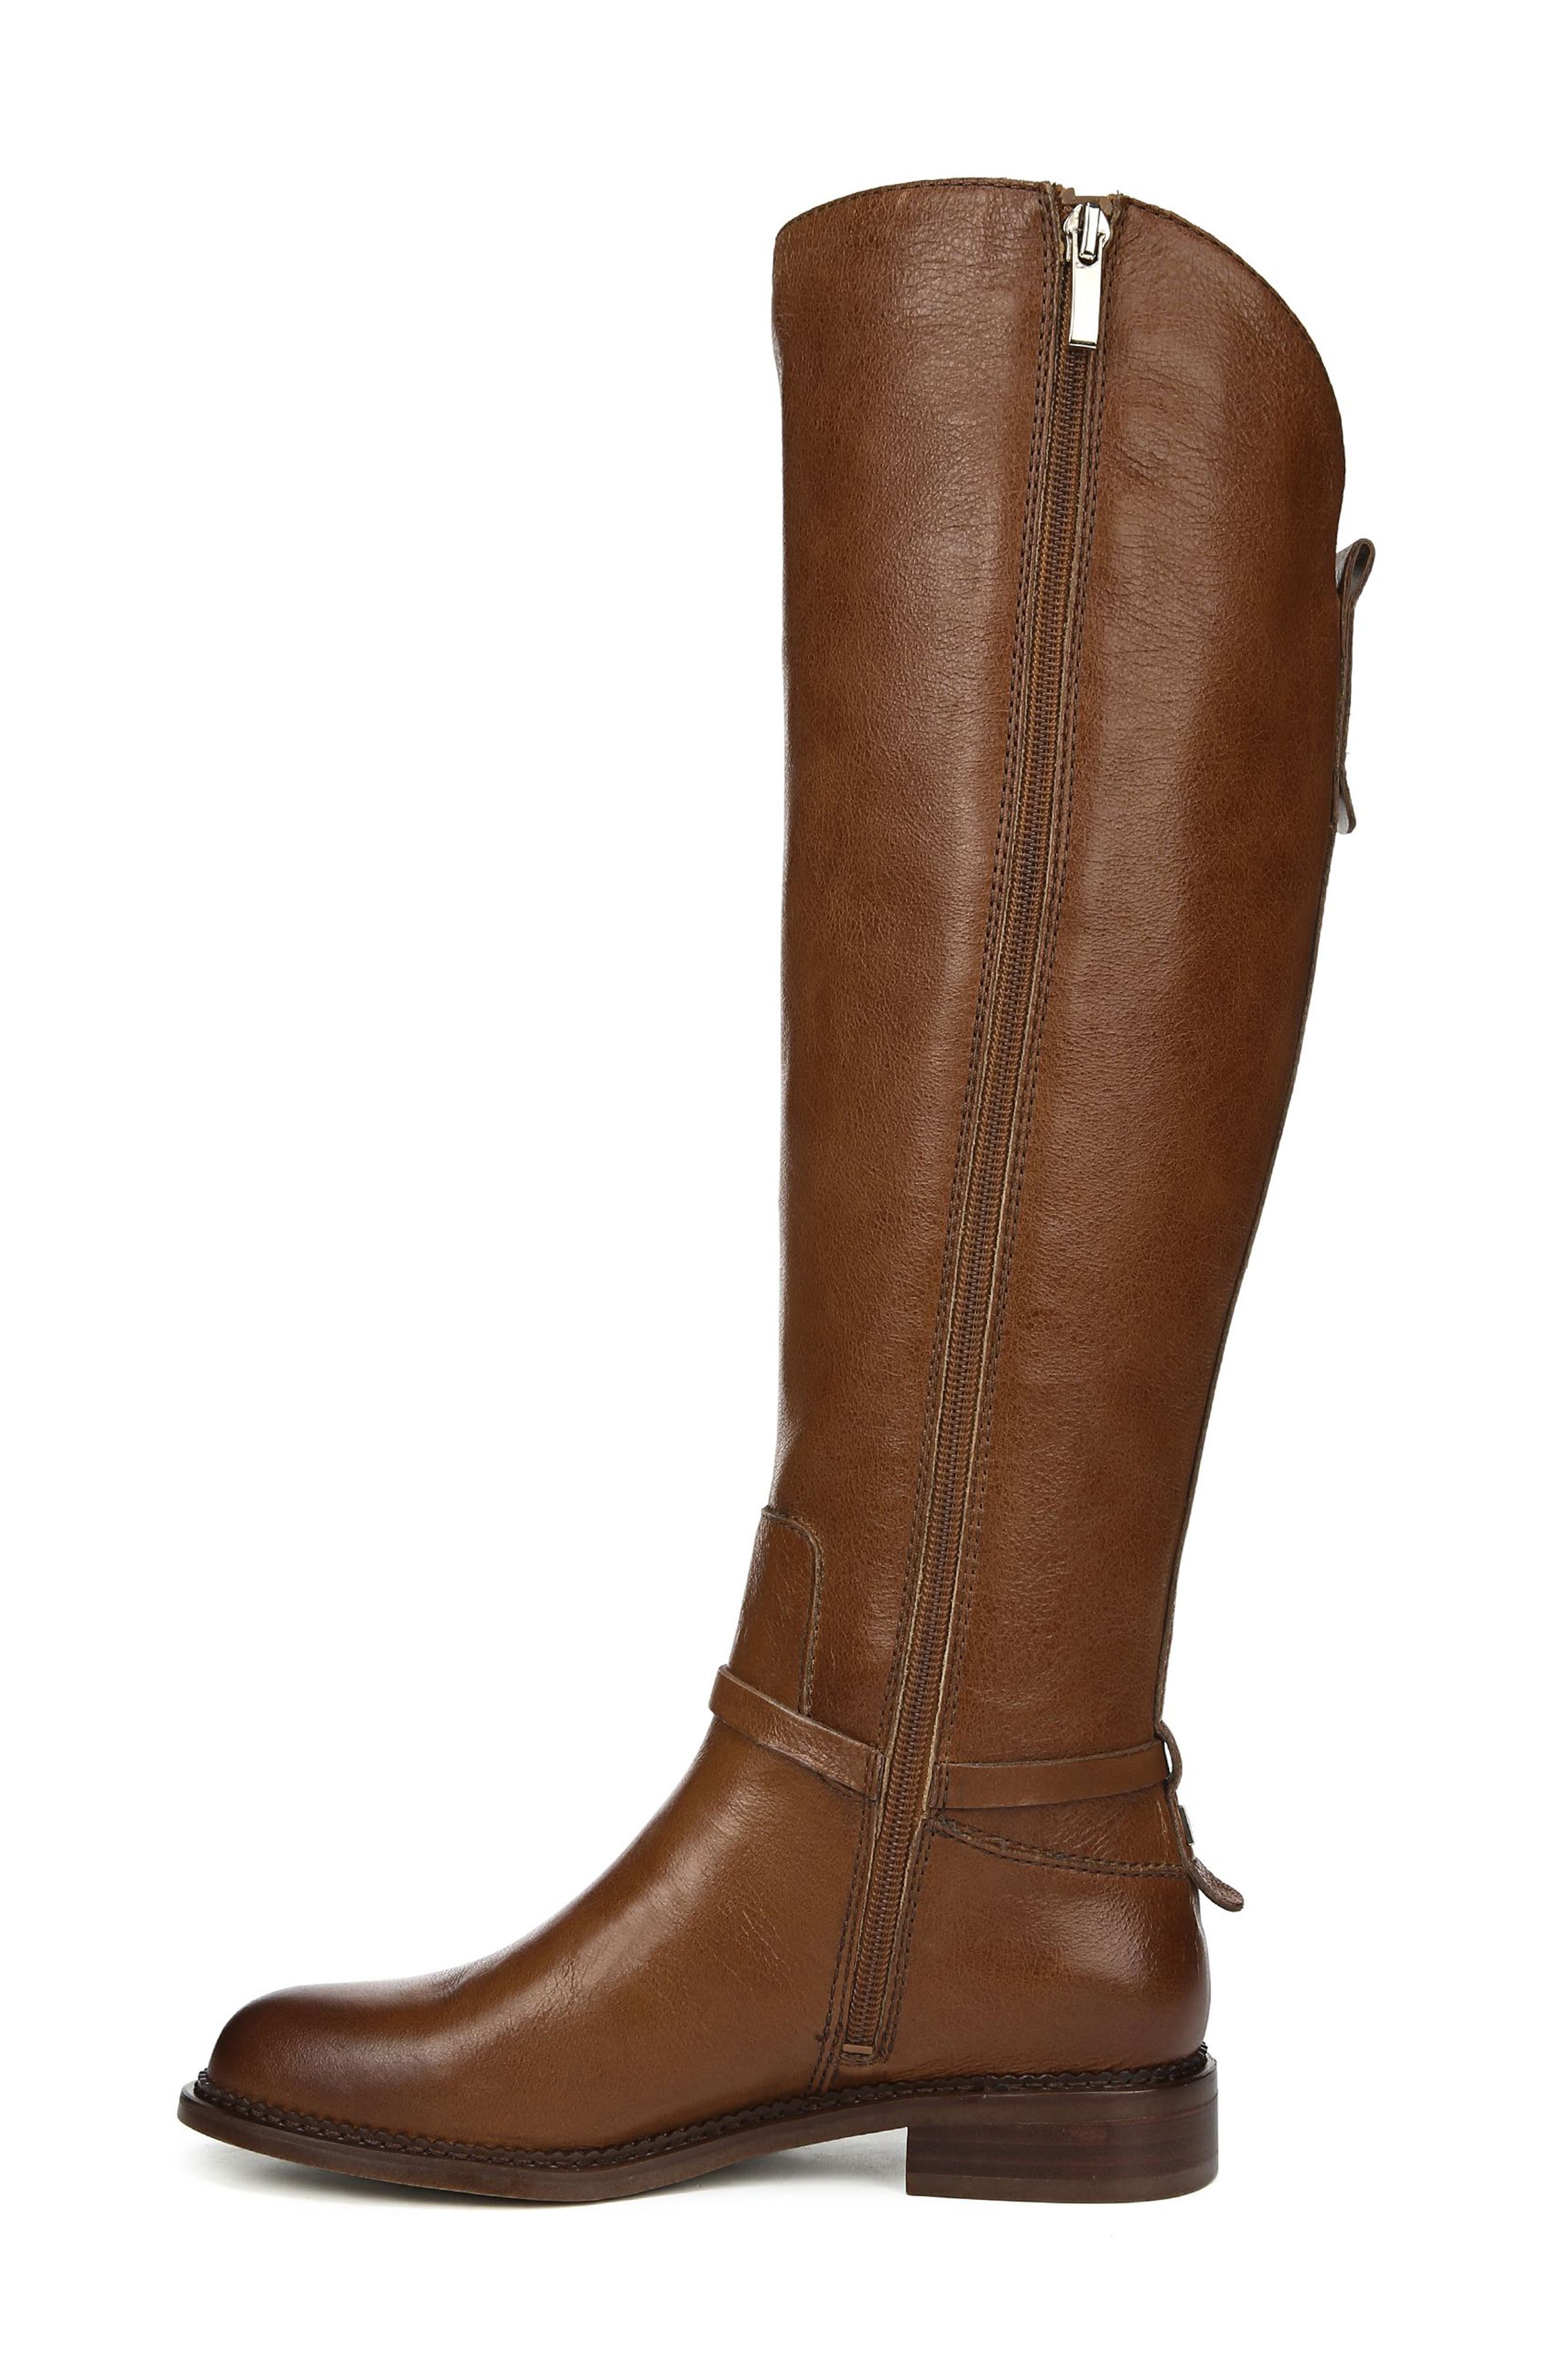 real leather boots wide calf